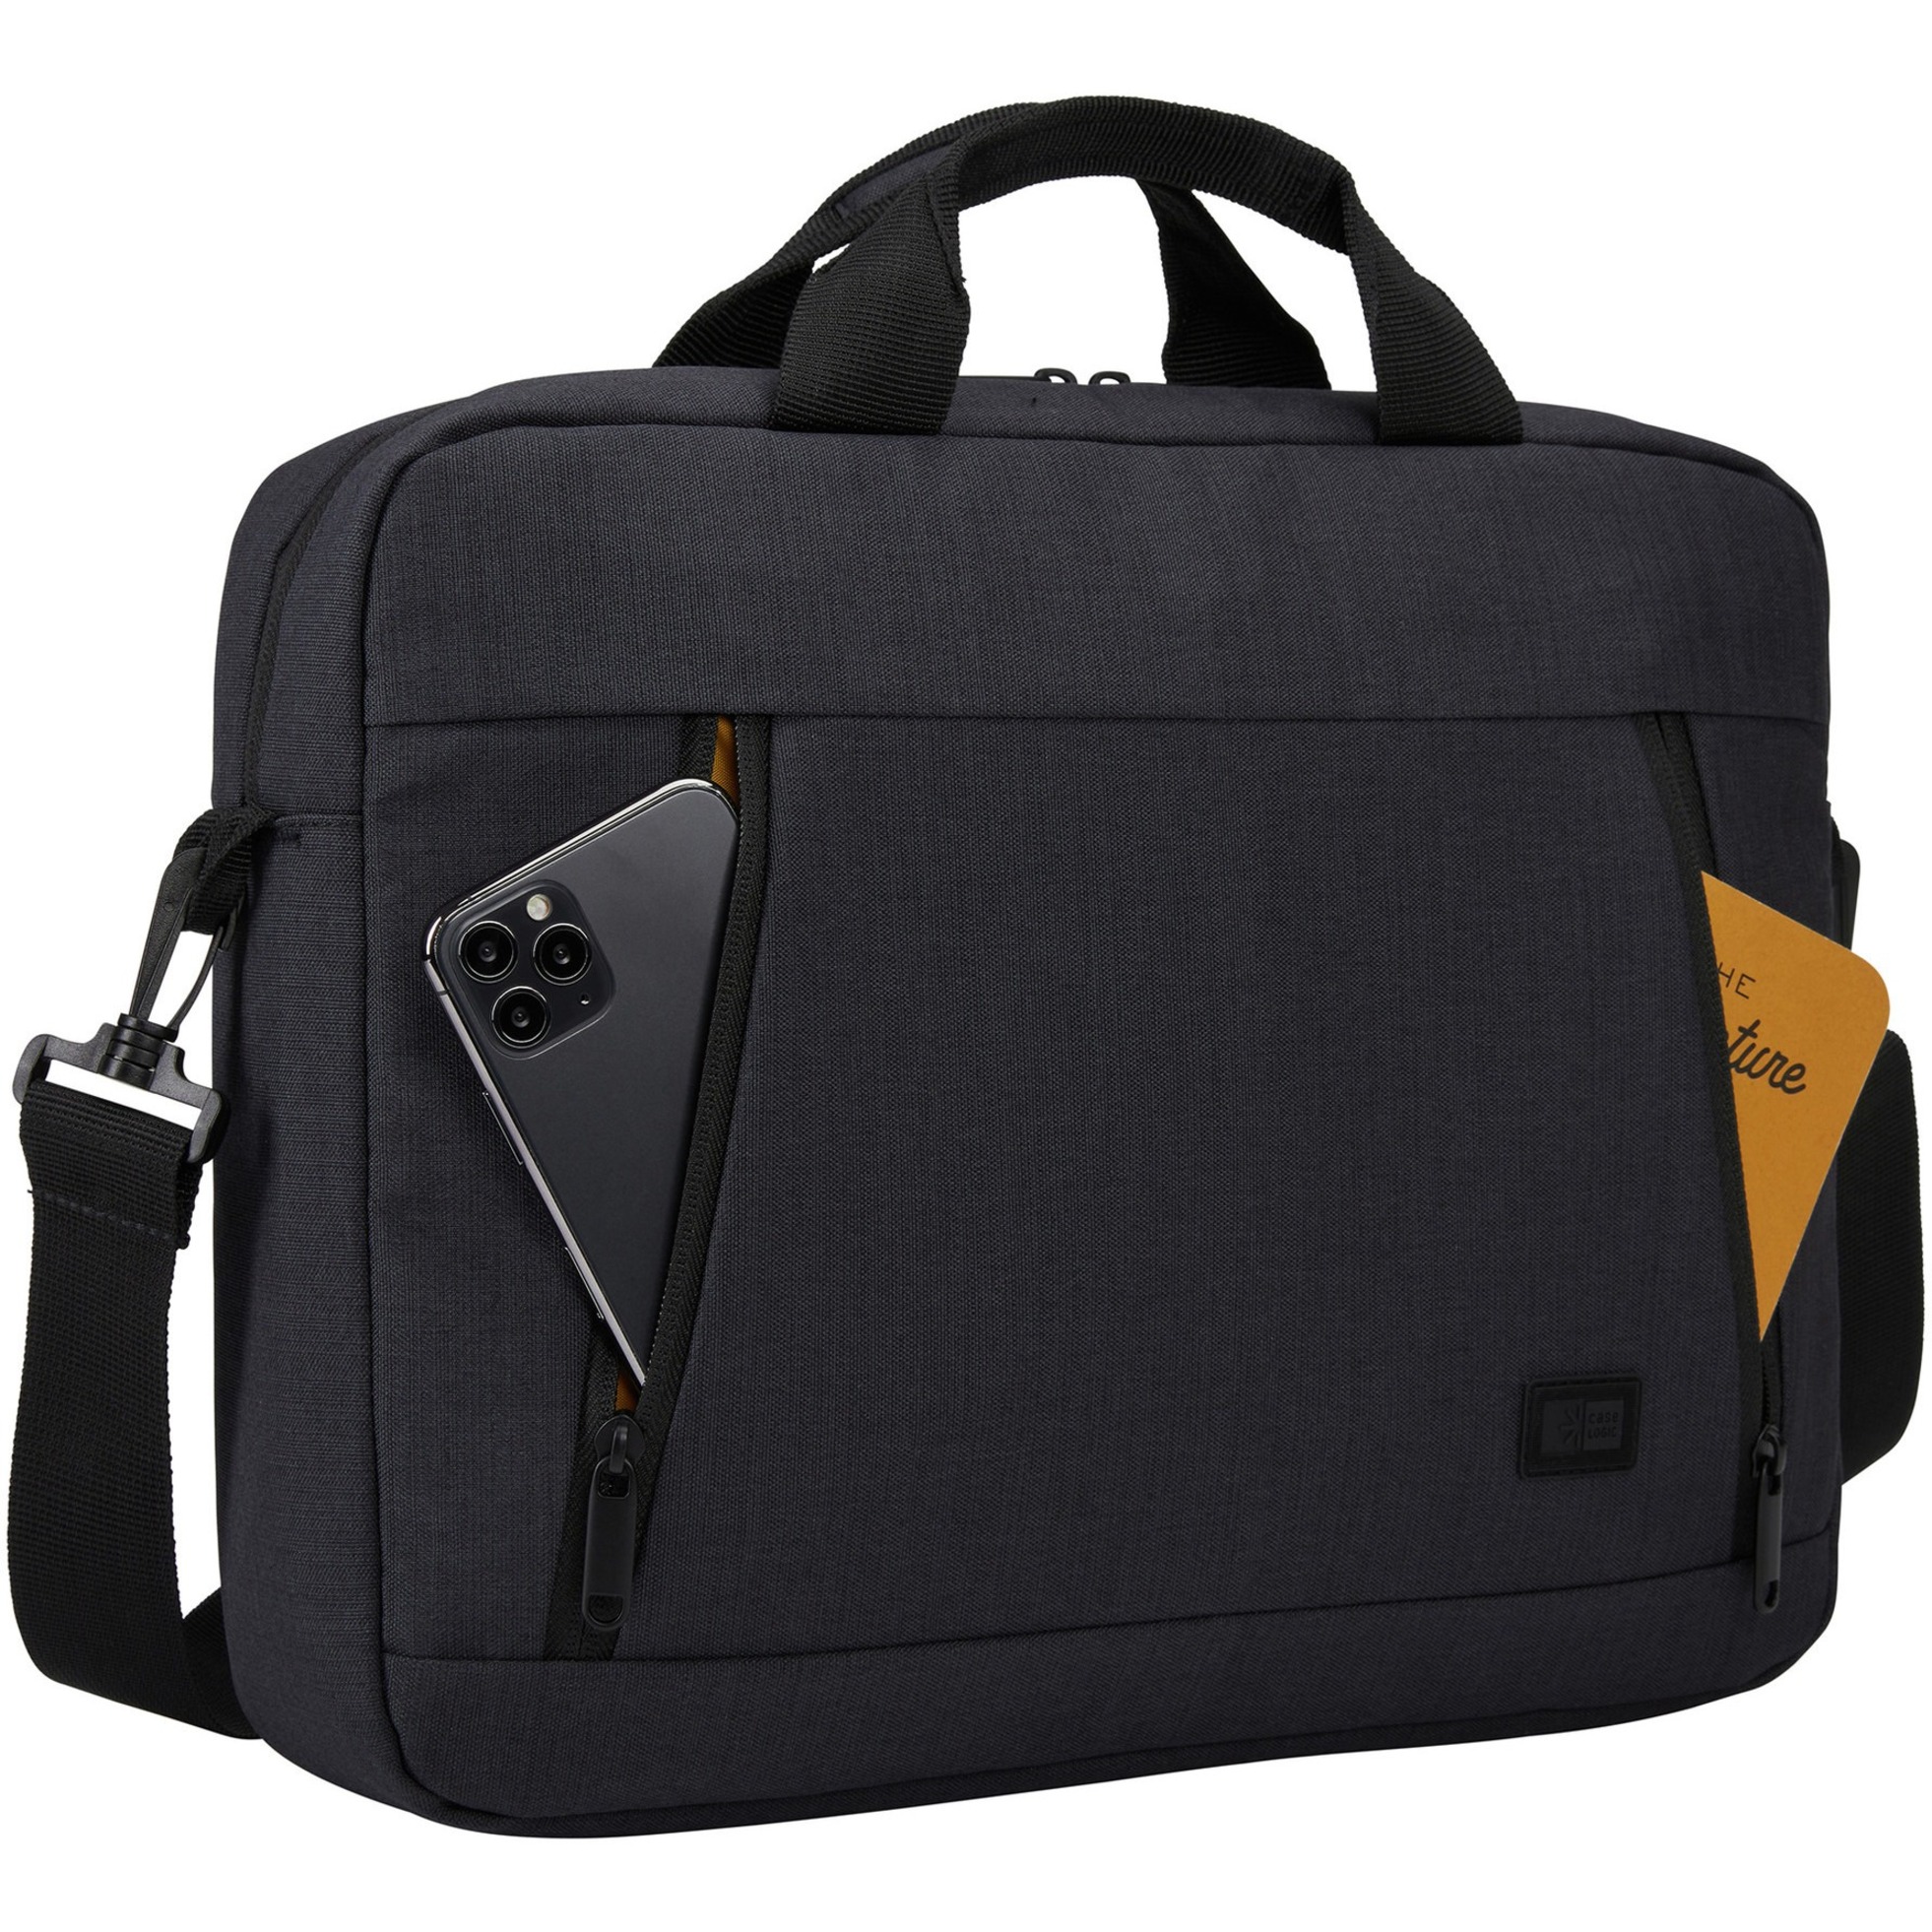 Carrying Case (Attach&eacute;) for 10" to 14" Notebook - Black - Walmart.com